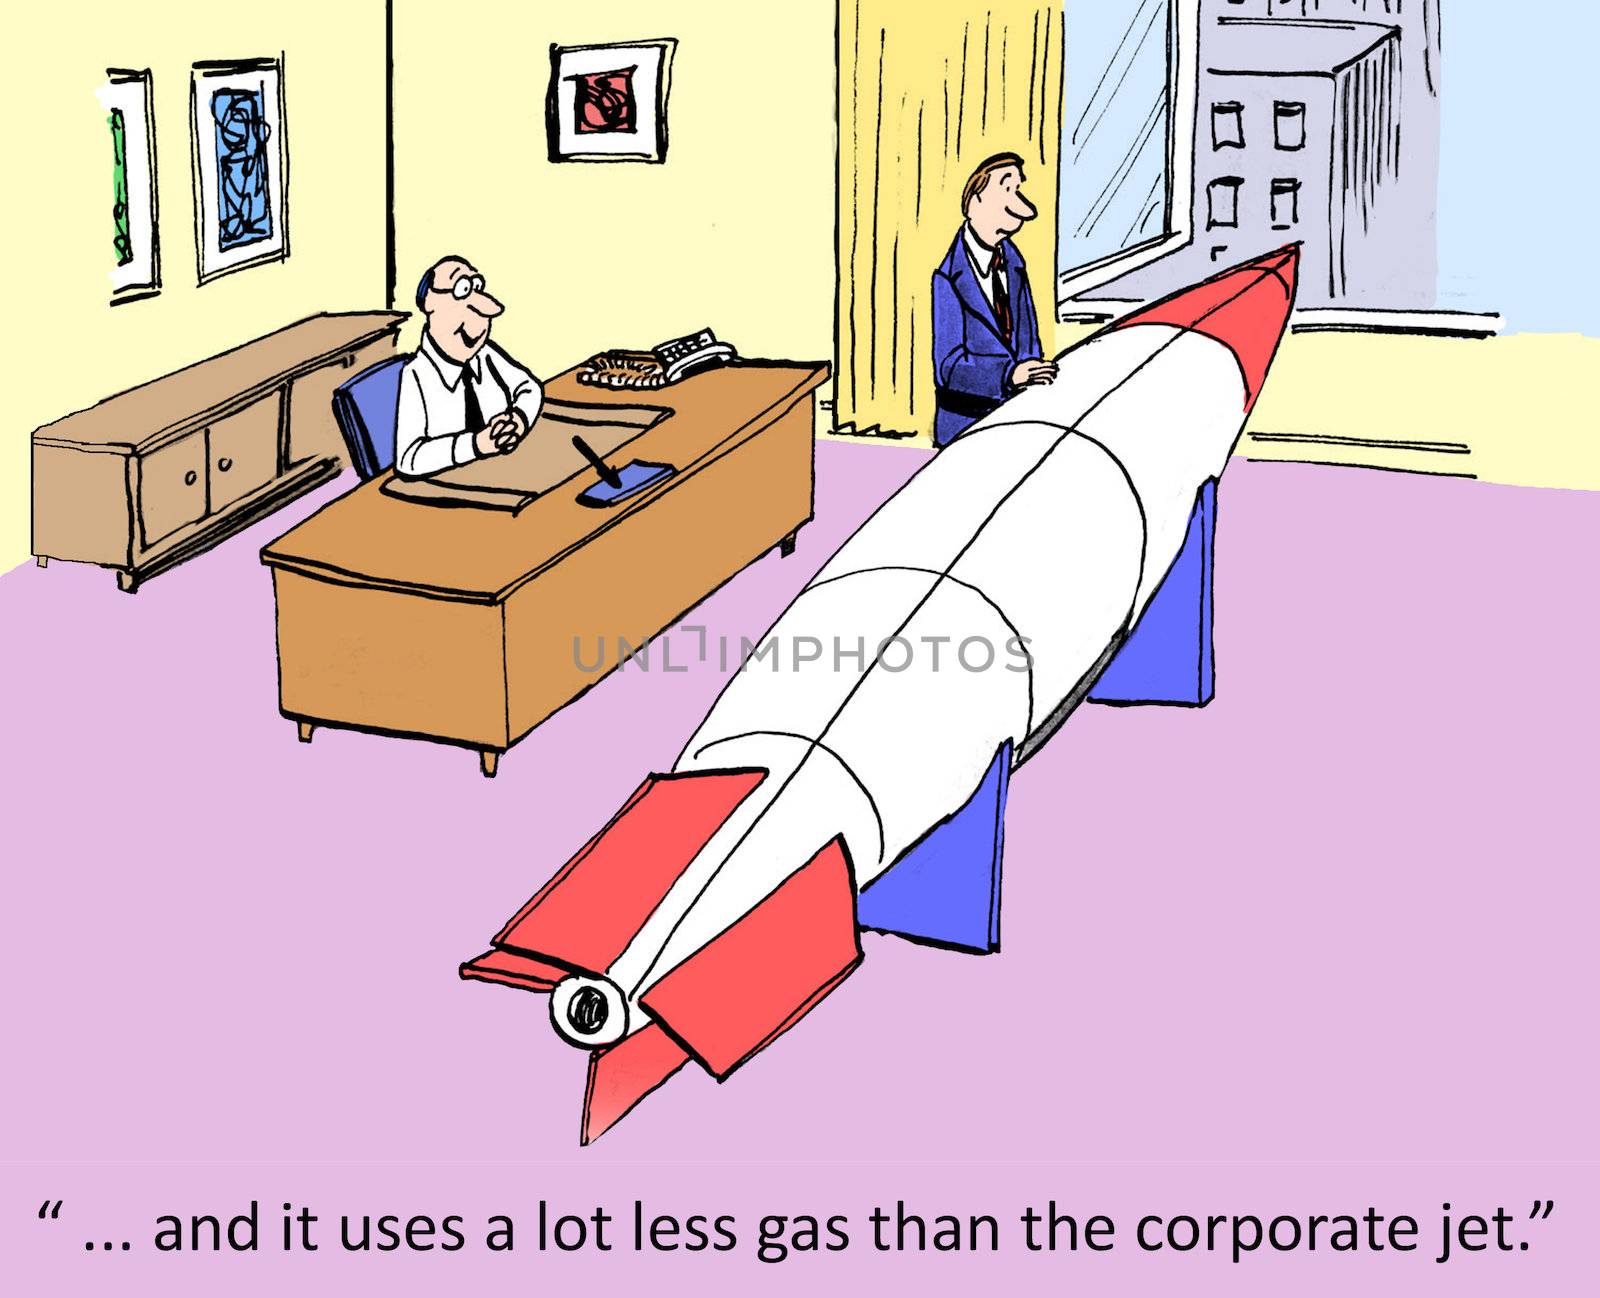 " ... and it uses a lot less gas than the corporate jet."